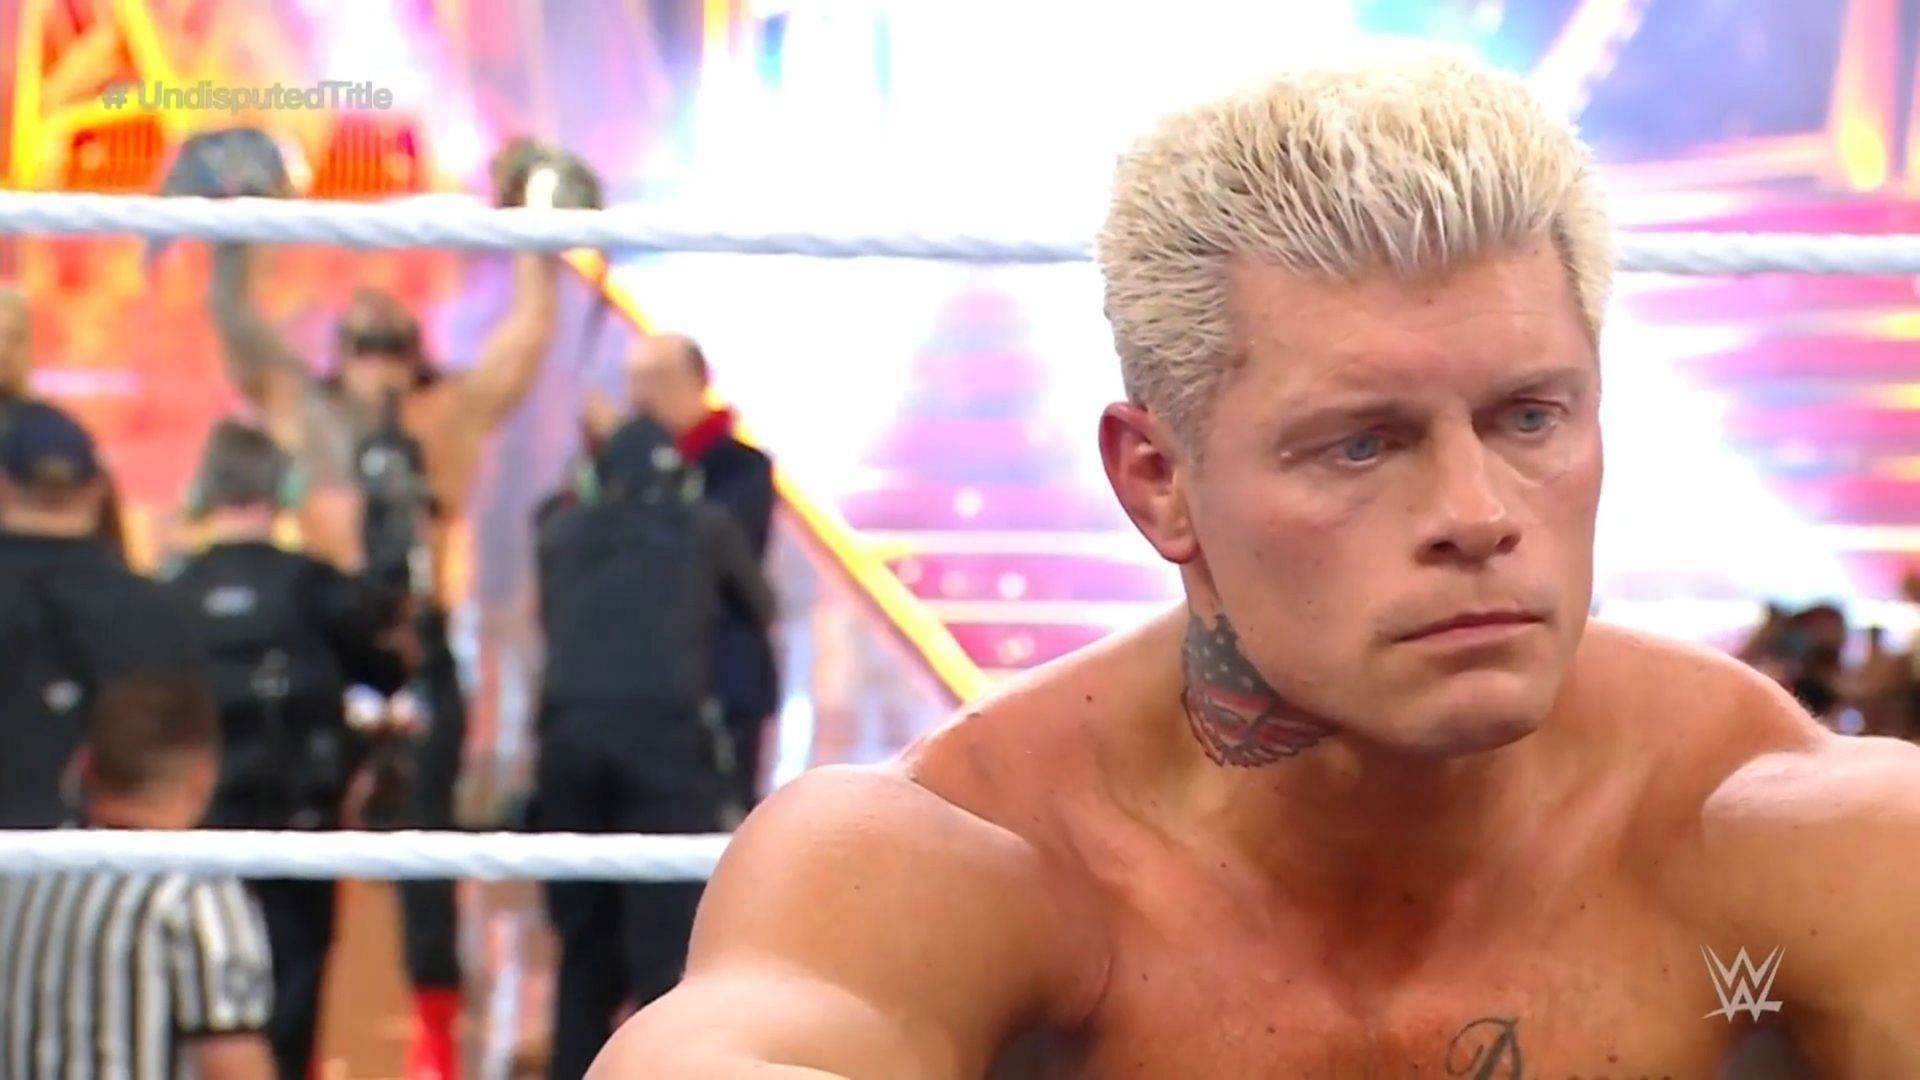 Will Cody Rhodes ever win the Undisputed WWE Universal Championship?